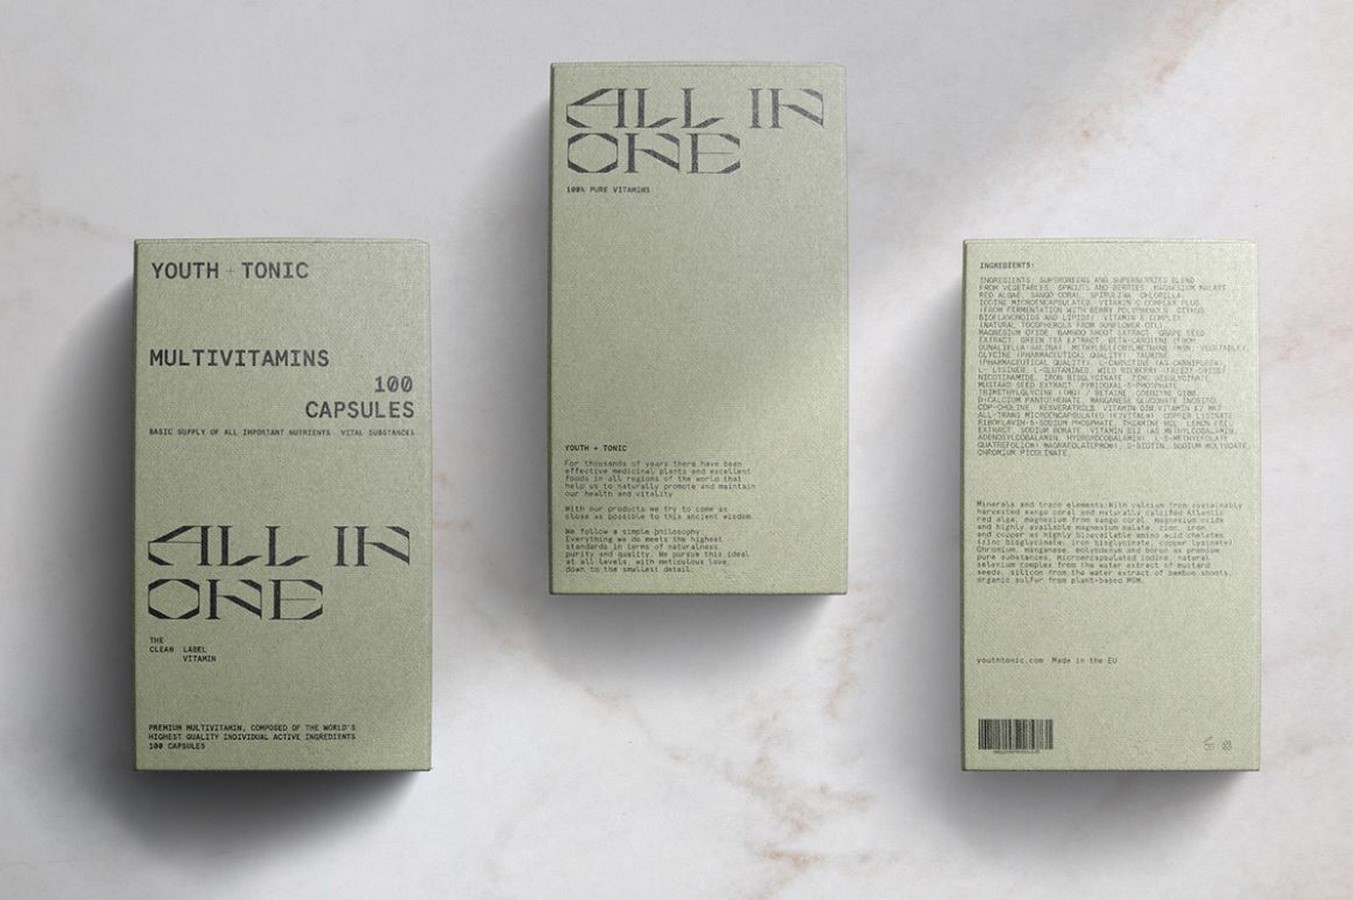 5 Trends in cosmetic packaging for 2022 - Structural PackagingStructural  Packaging